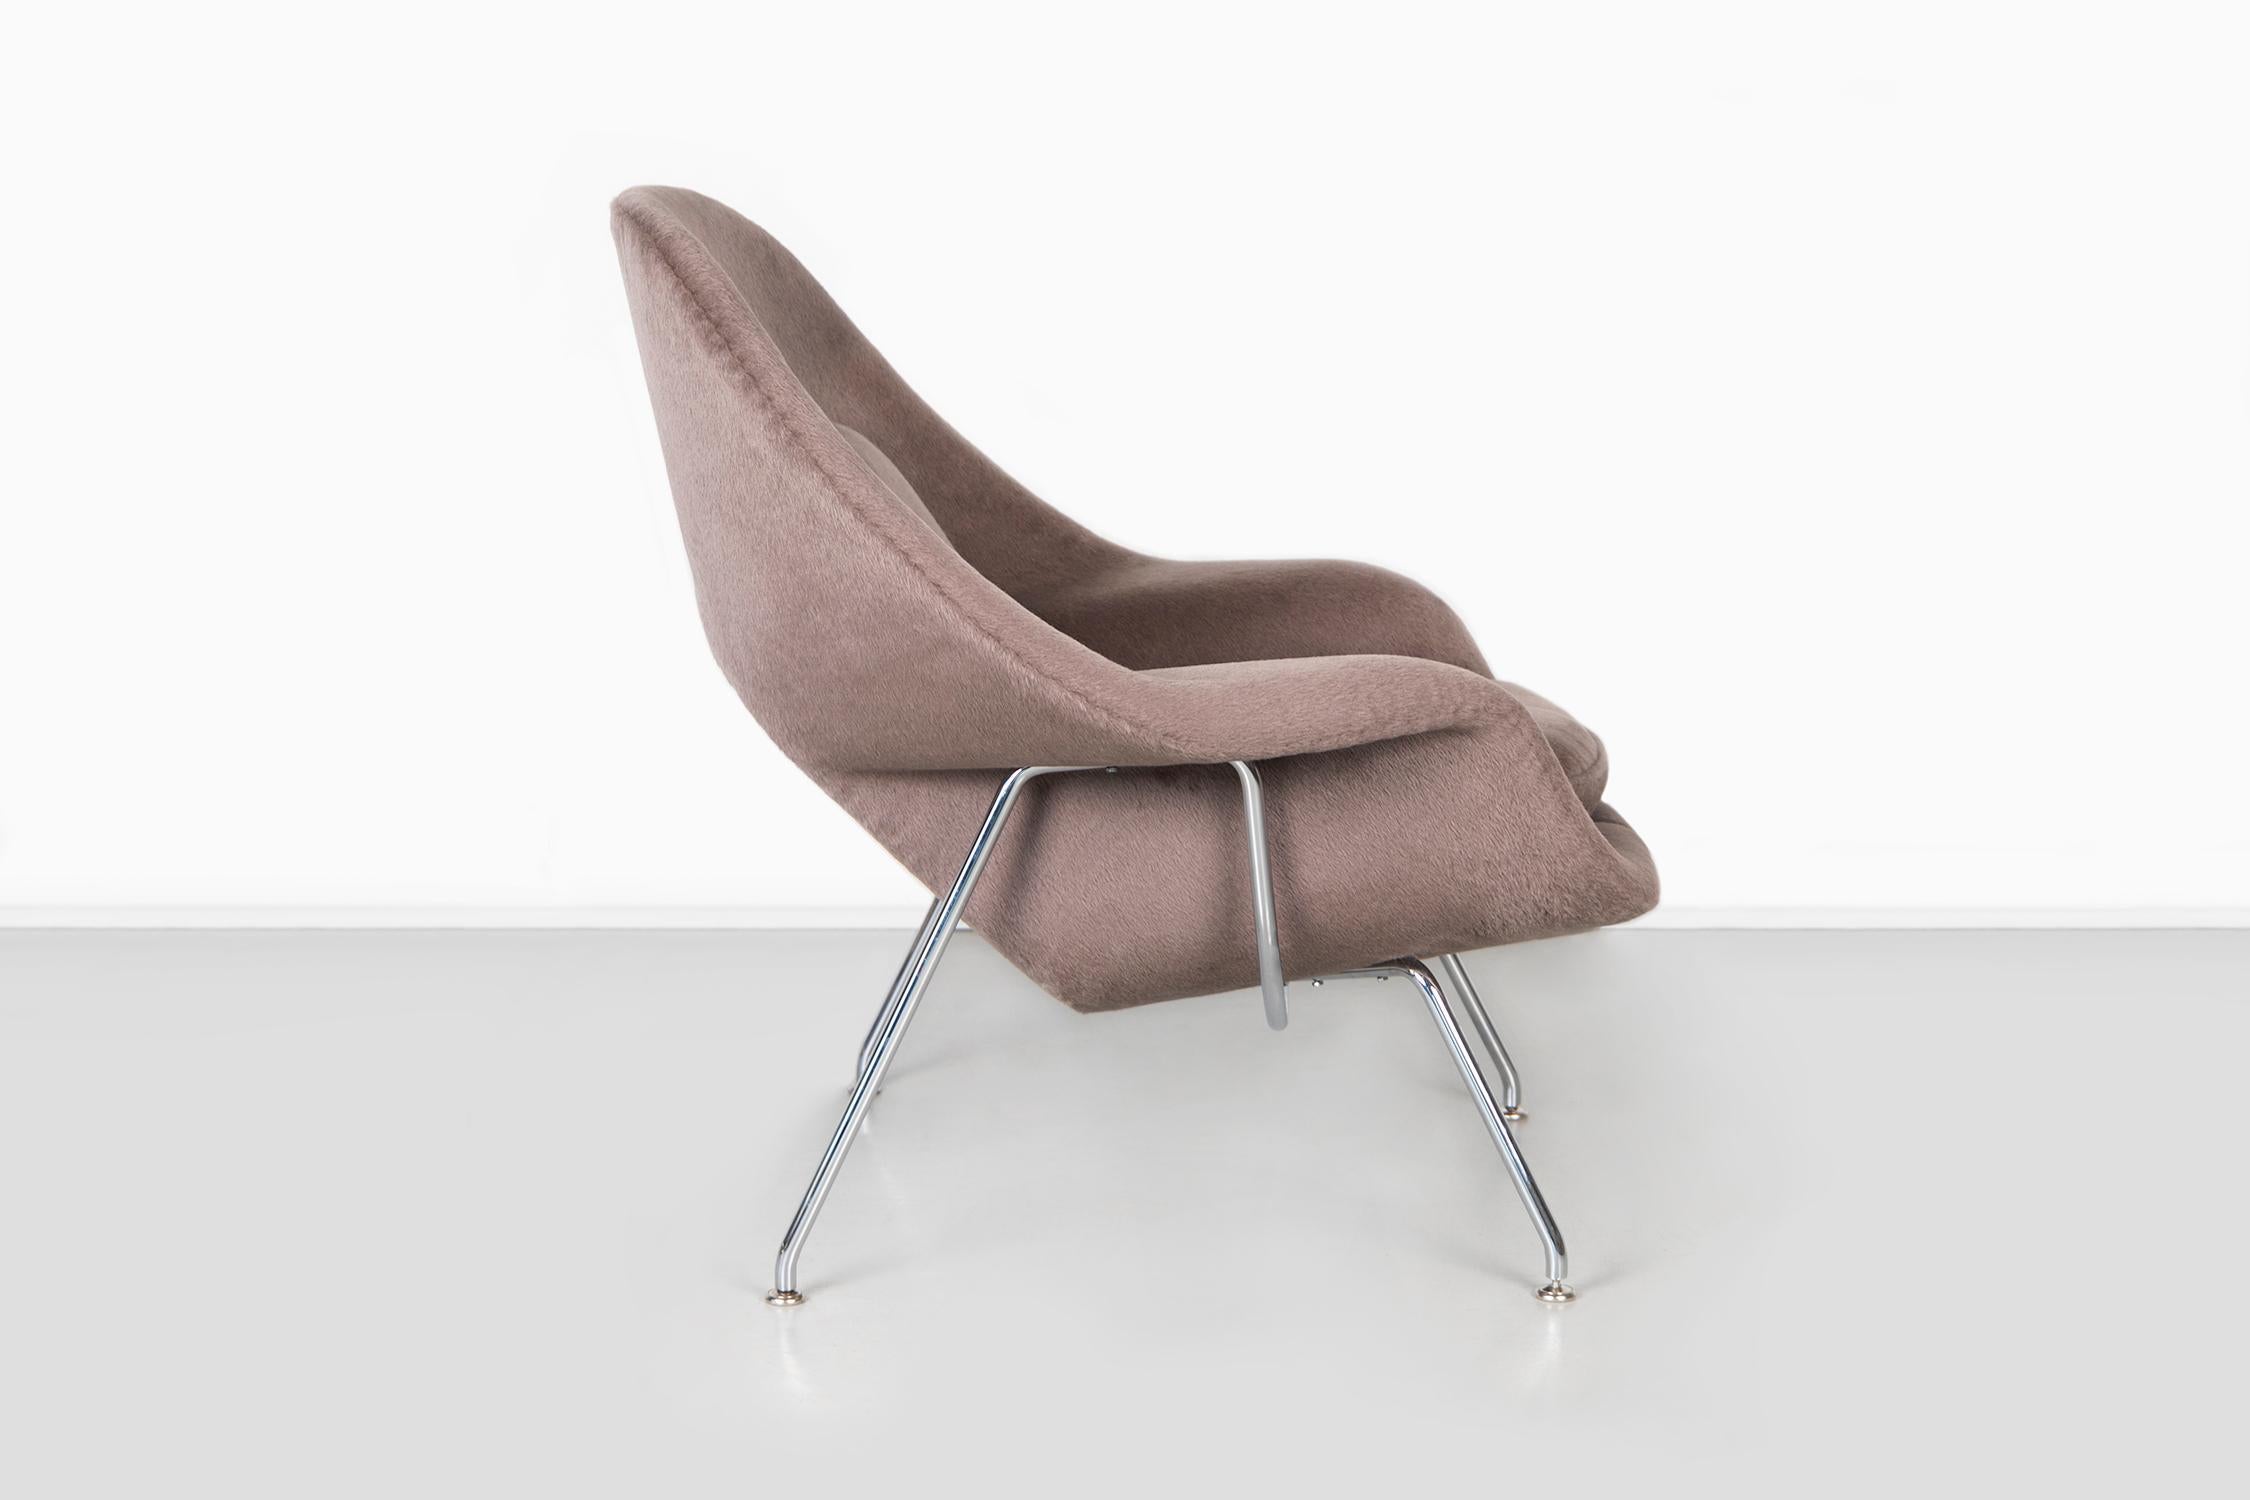 Knoll Medium Womb Chair Upholstered in Alpaca 2